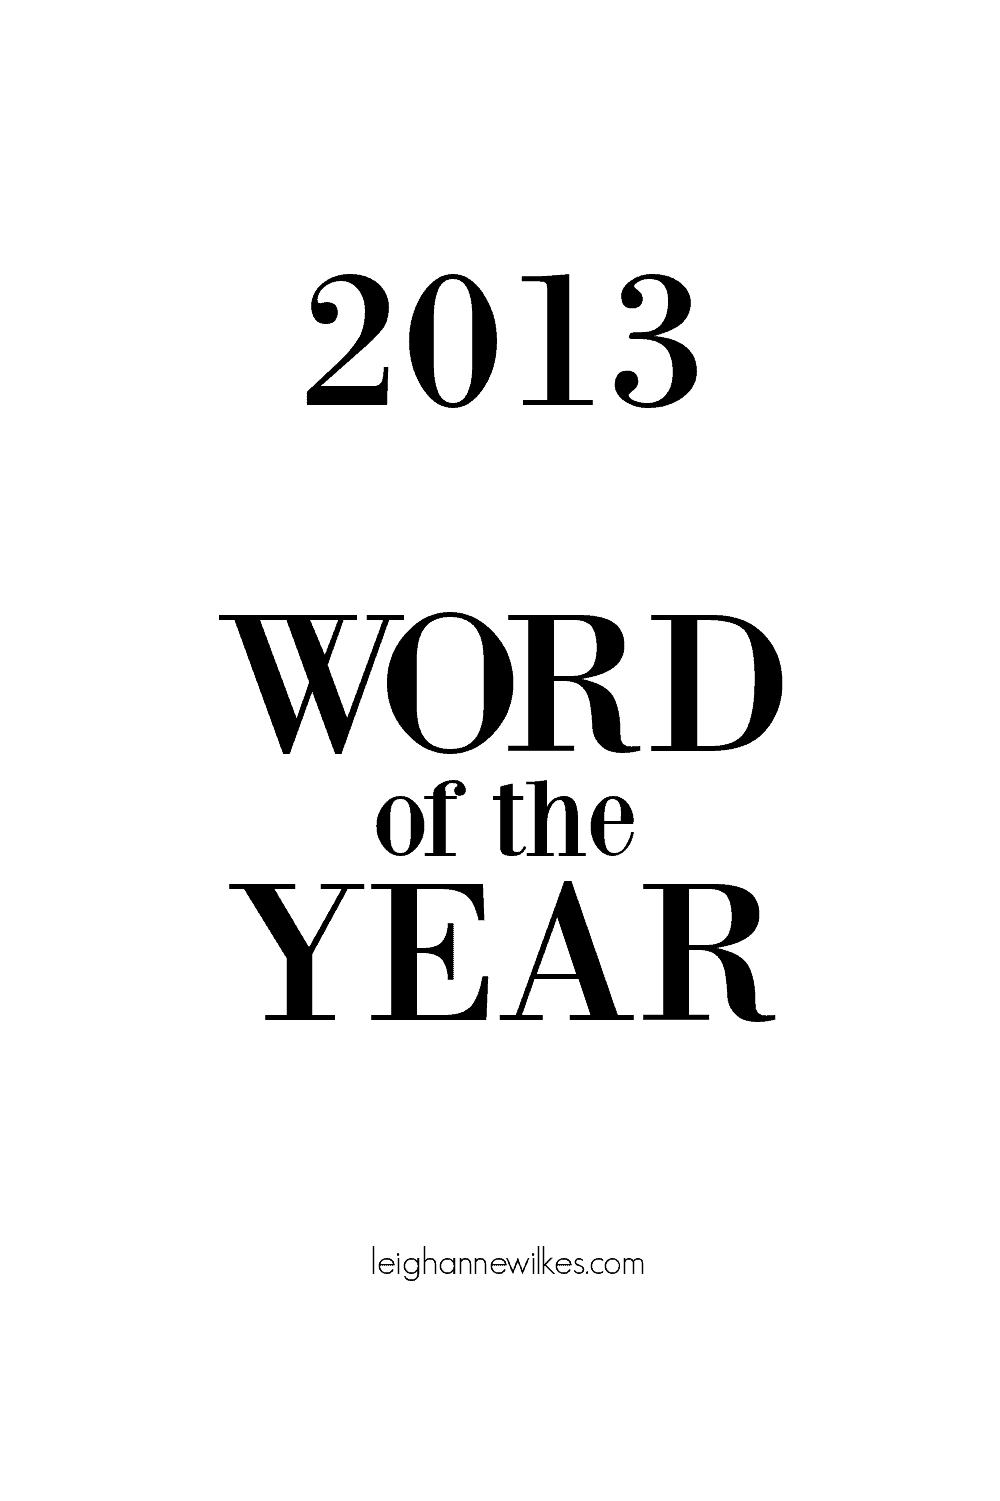 2013 word of the year